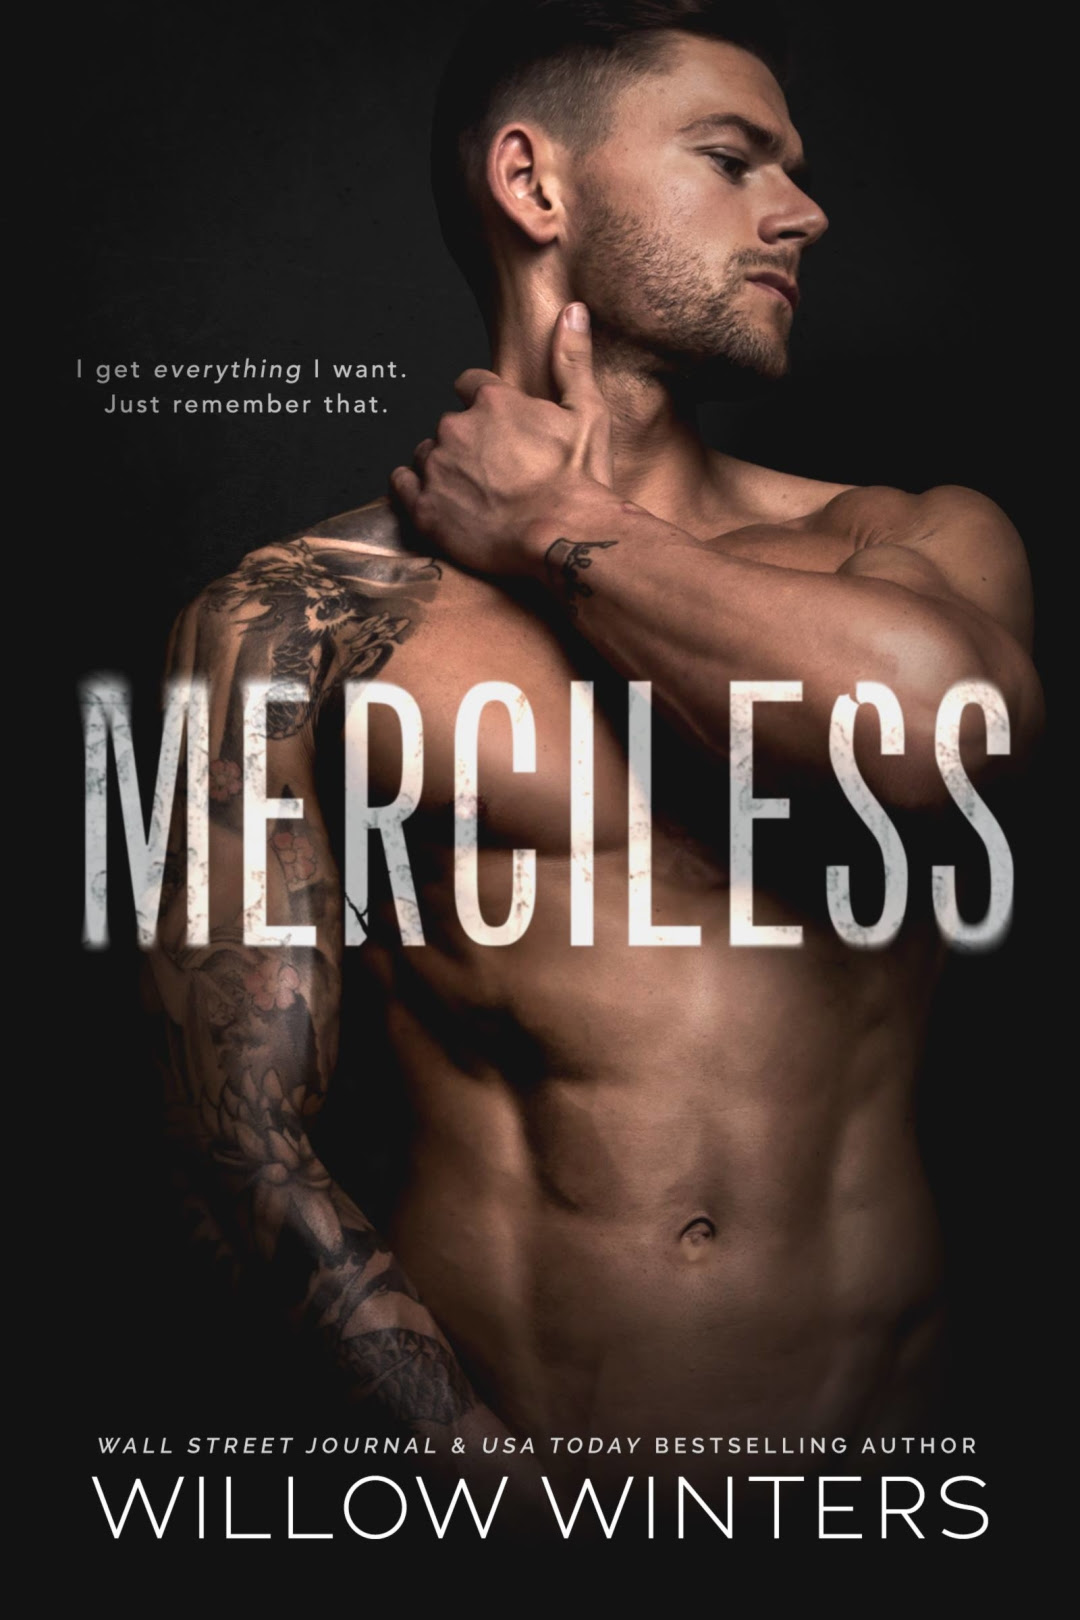 Merciless by Willow Winters: coming May 15!